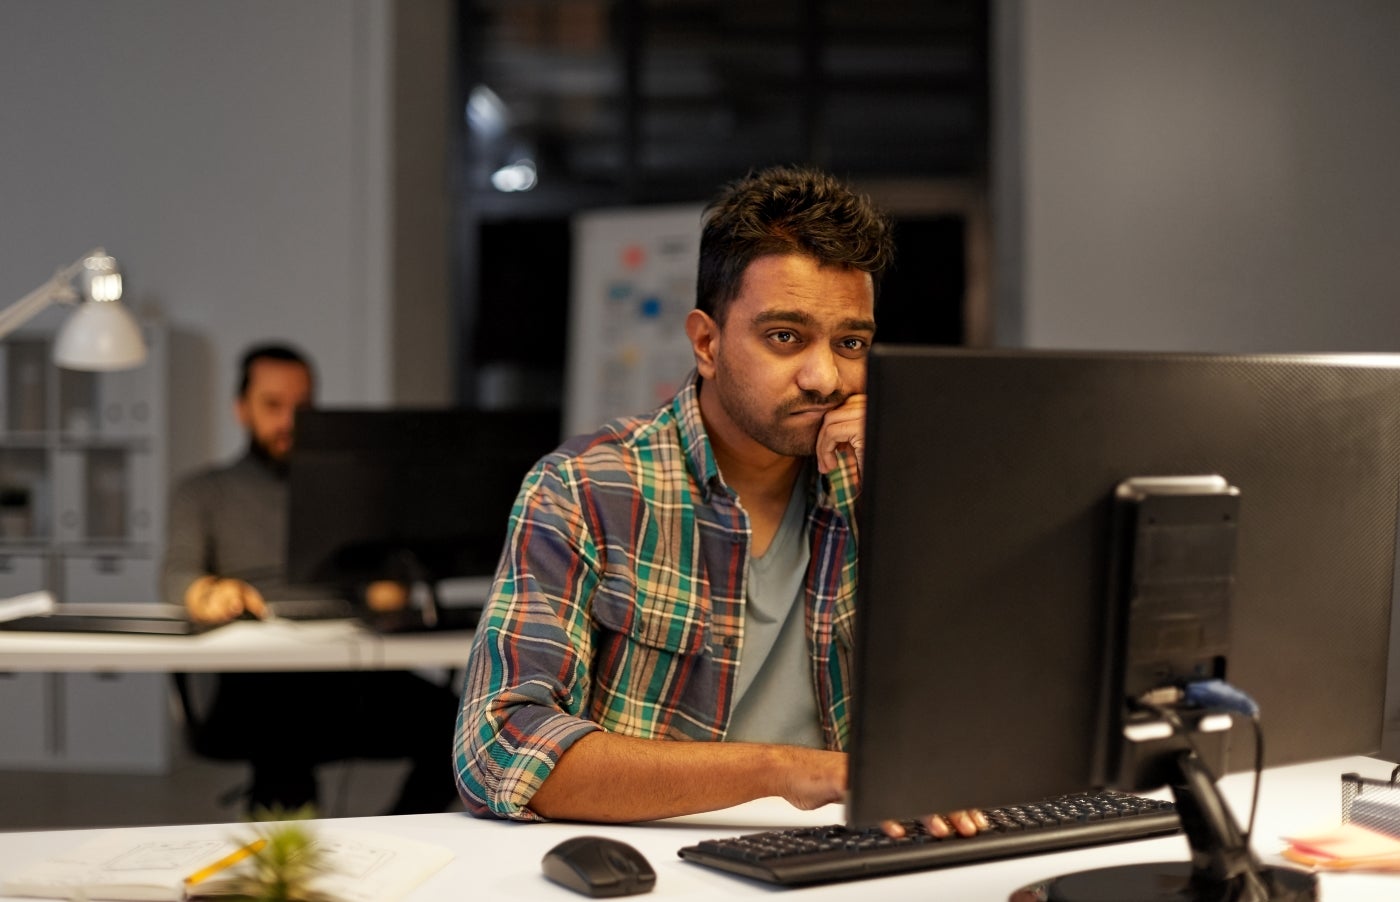 A visibly tired/frustrated man working at a computer in an office setting with another coworker in the background